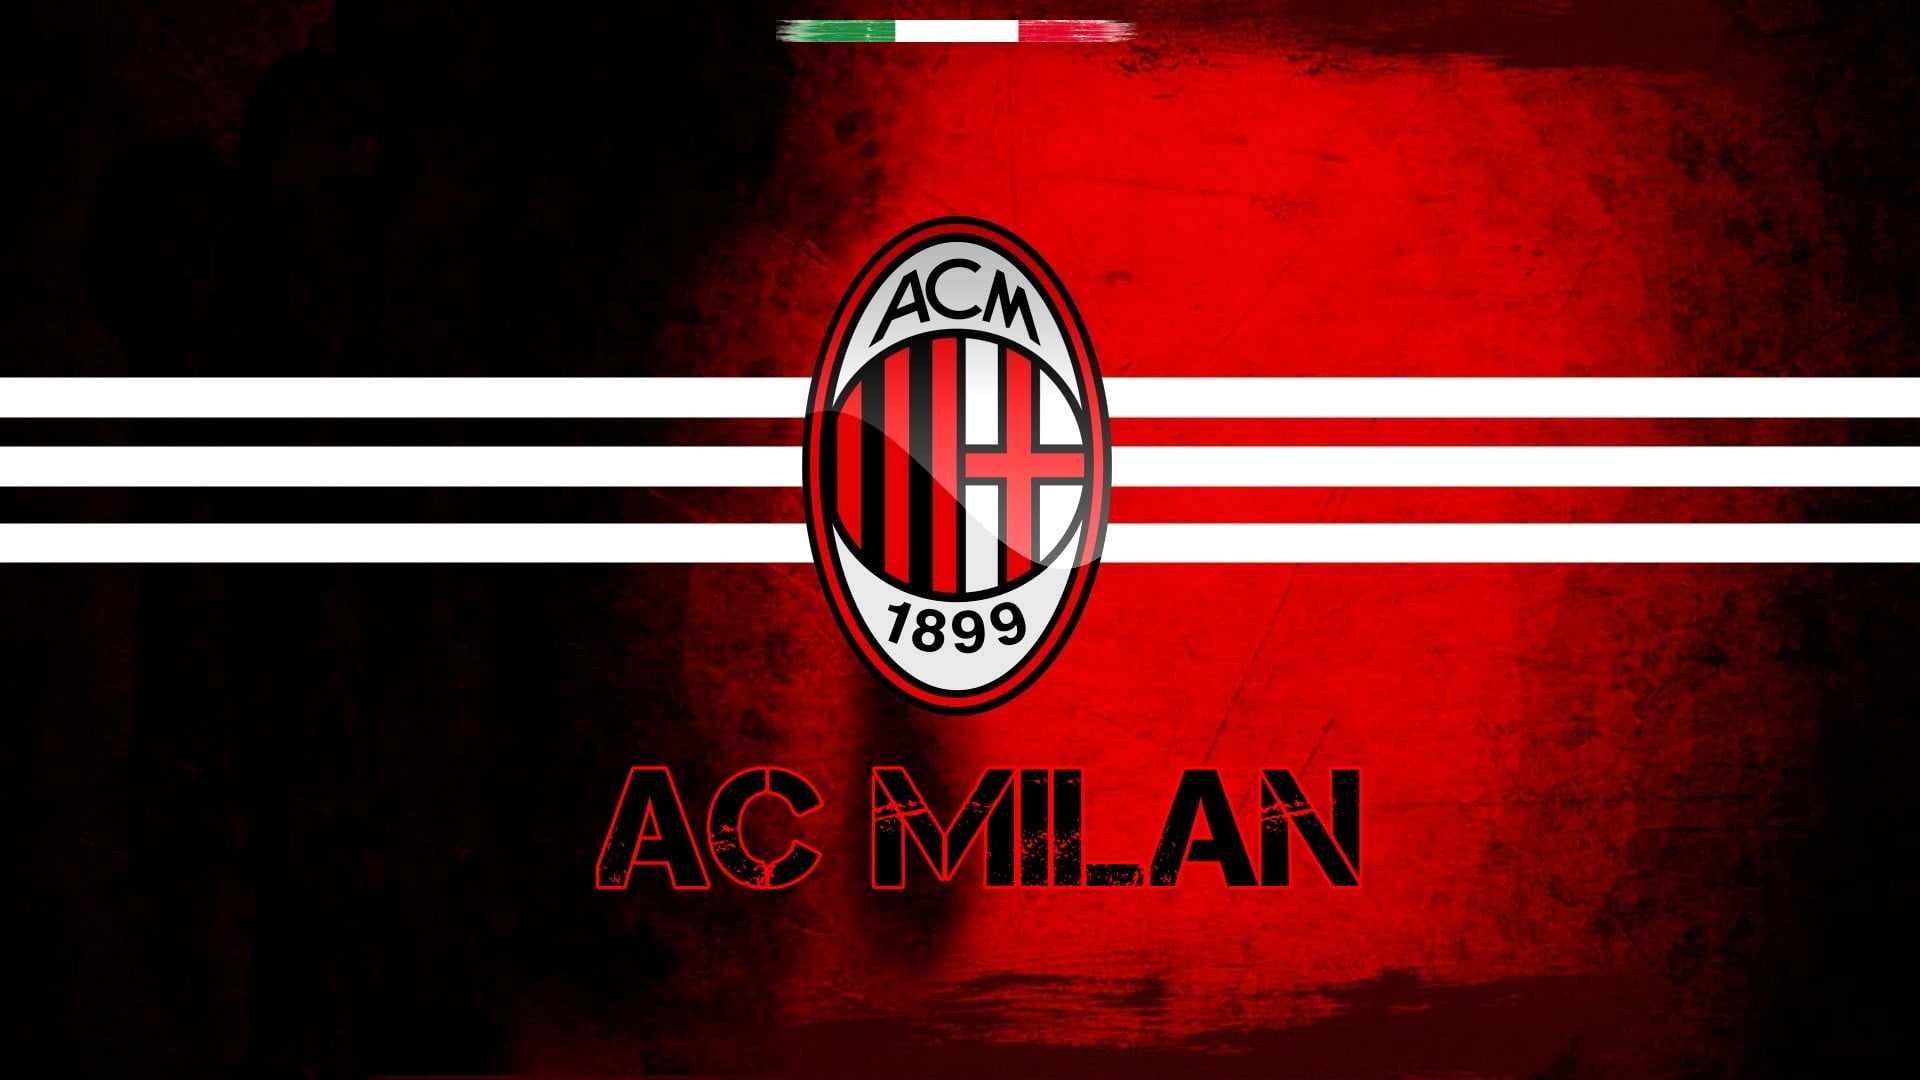 1899 AC Milan logo, sports, soccer clubs, Italy, sign, communication